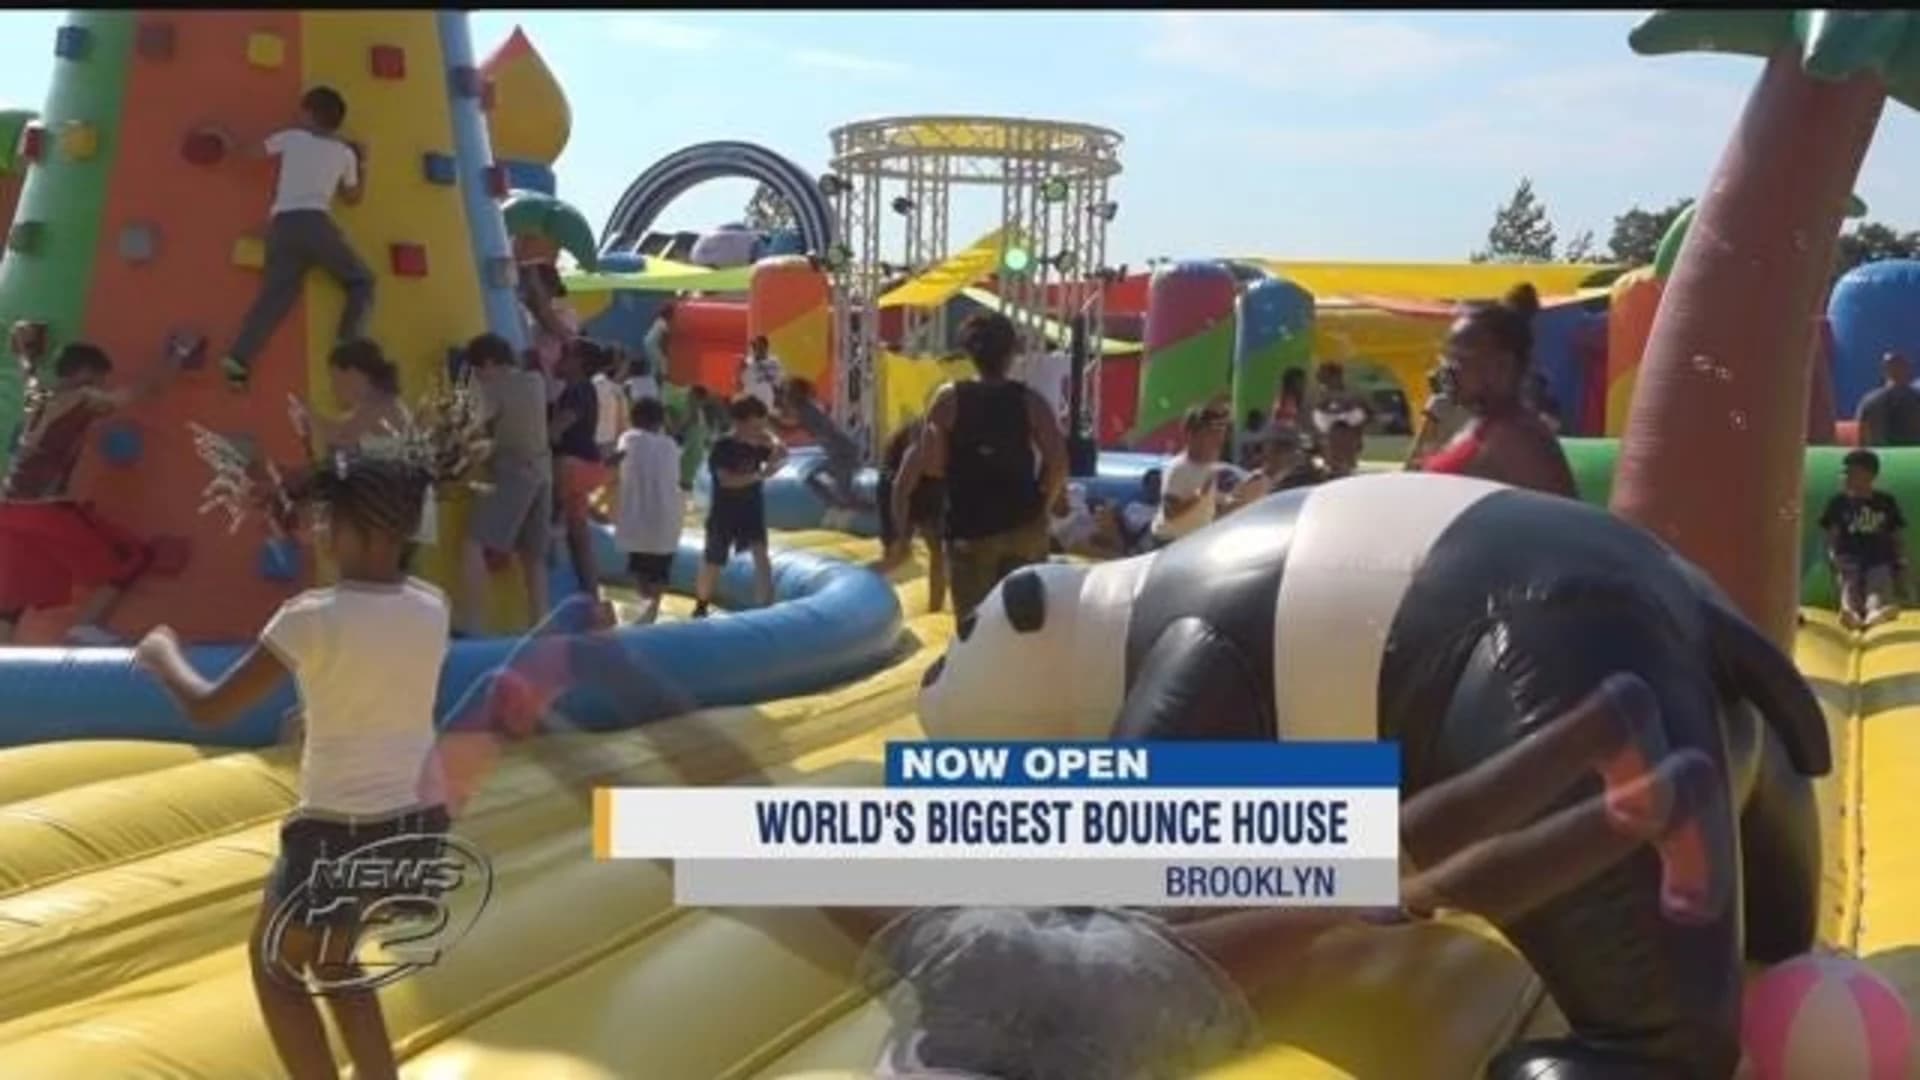 World's biggest bounce house extends its stay in the area